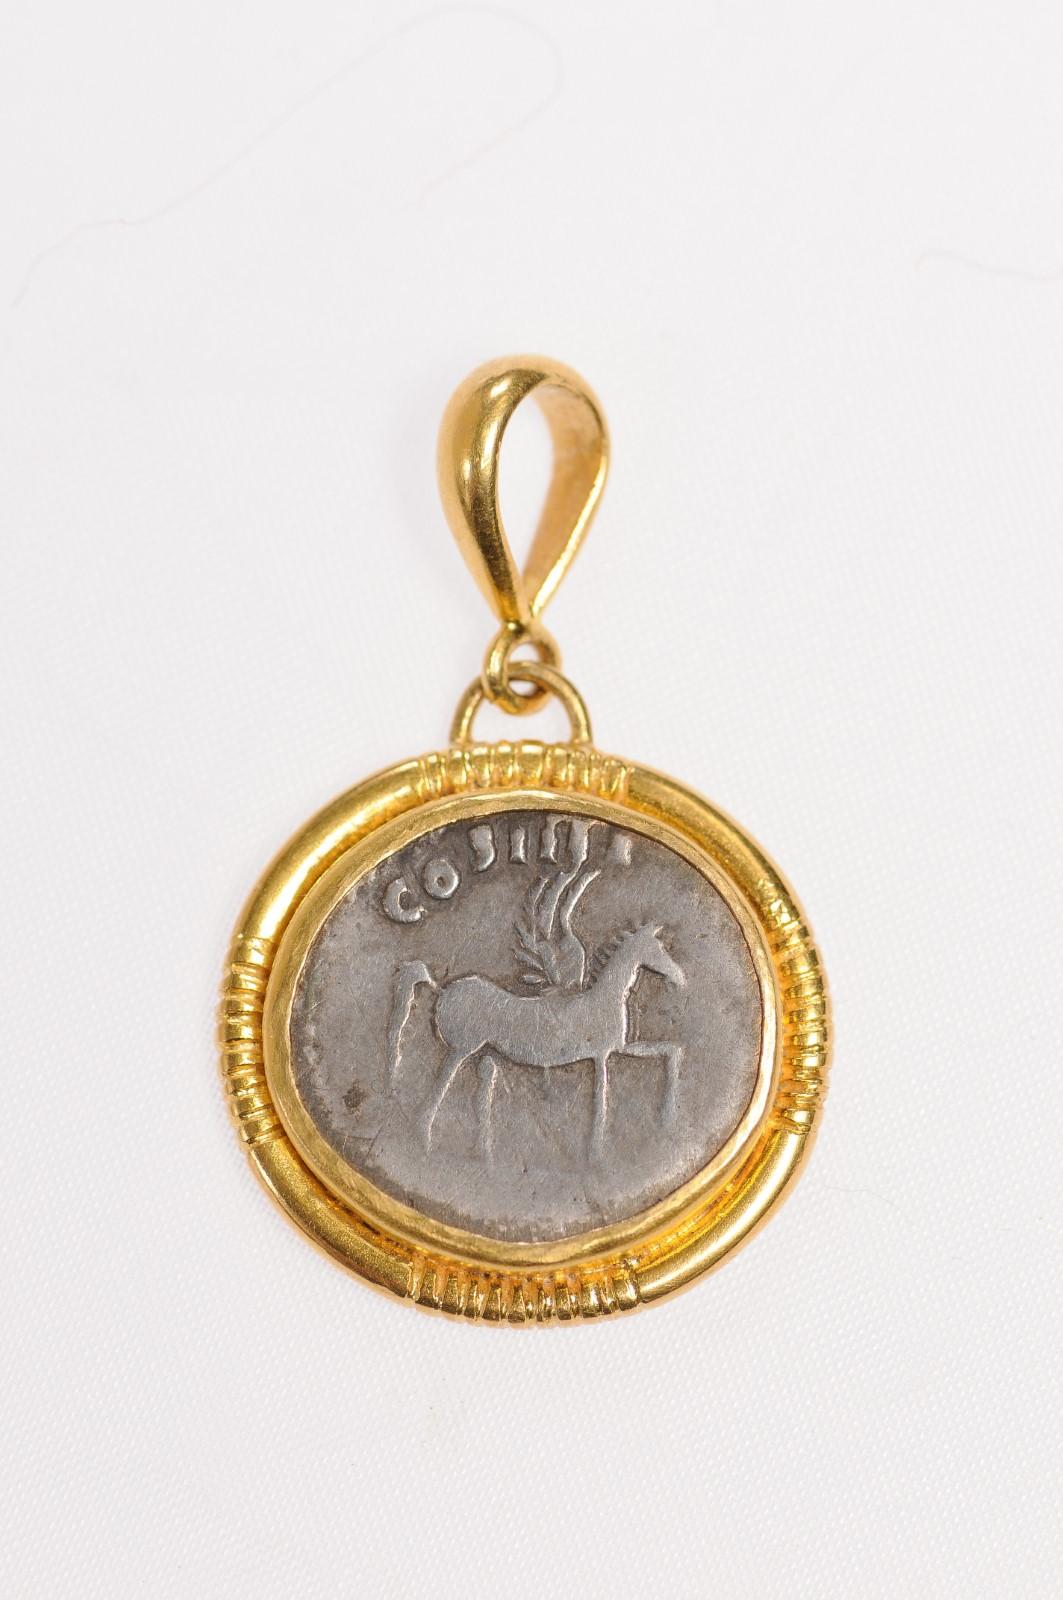 An Authentic Domitian, Silver Denarius Coin (Circa 76 AD), set in a custom 22k gold bezel with 22k gold bail. Pendant features a winged Pegasus, standing right with raised foot, with COS IIII above. Reverse side showing CAESAR AVG F DOMITIANVS,